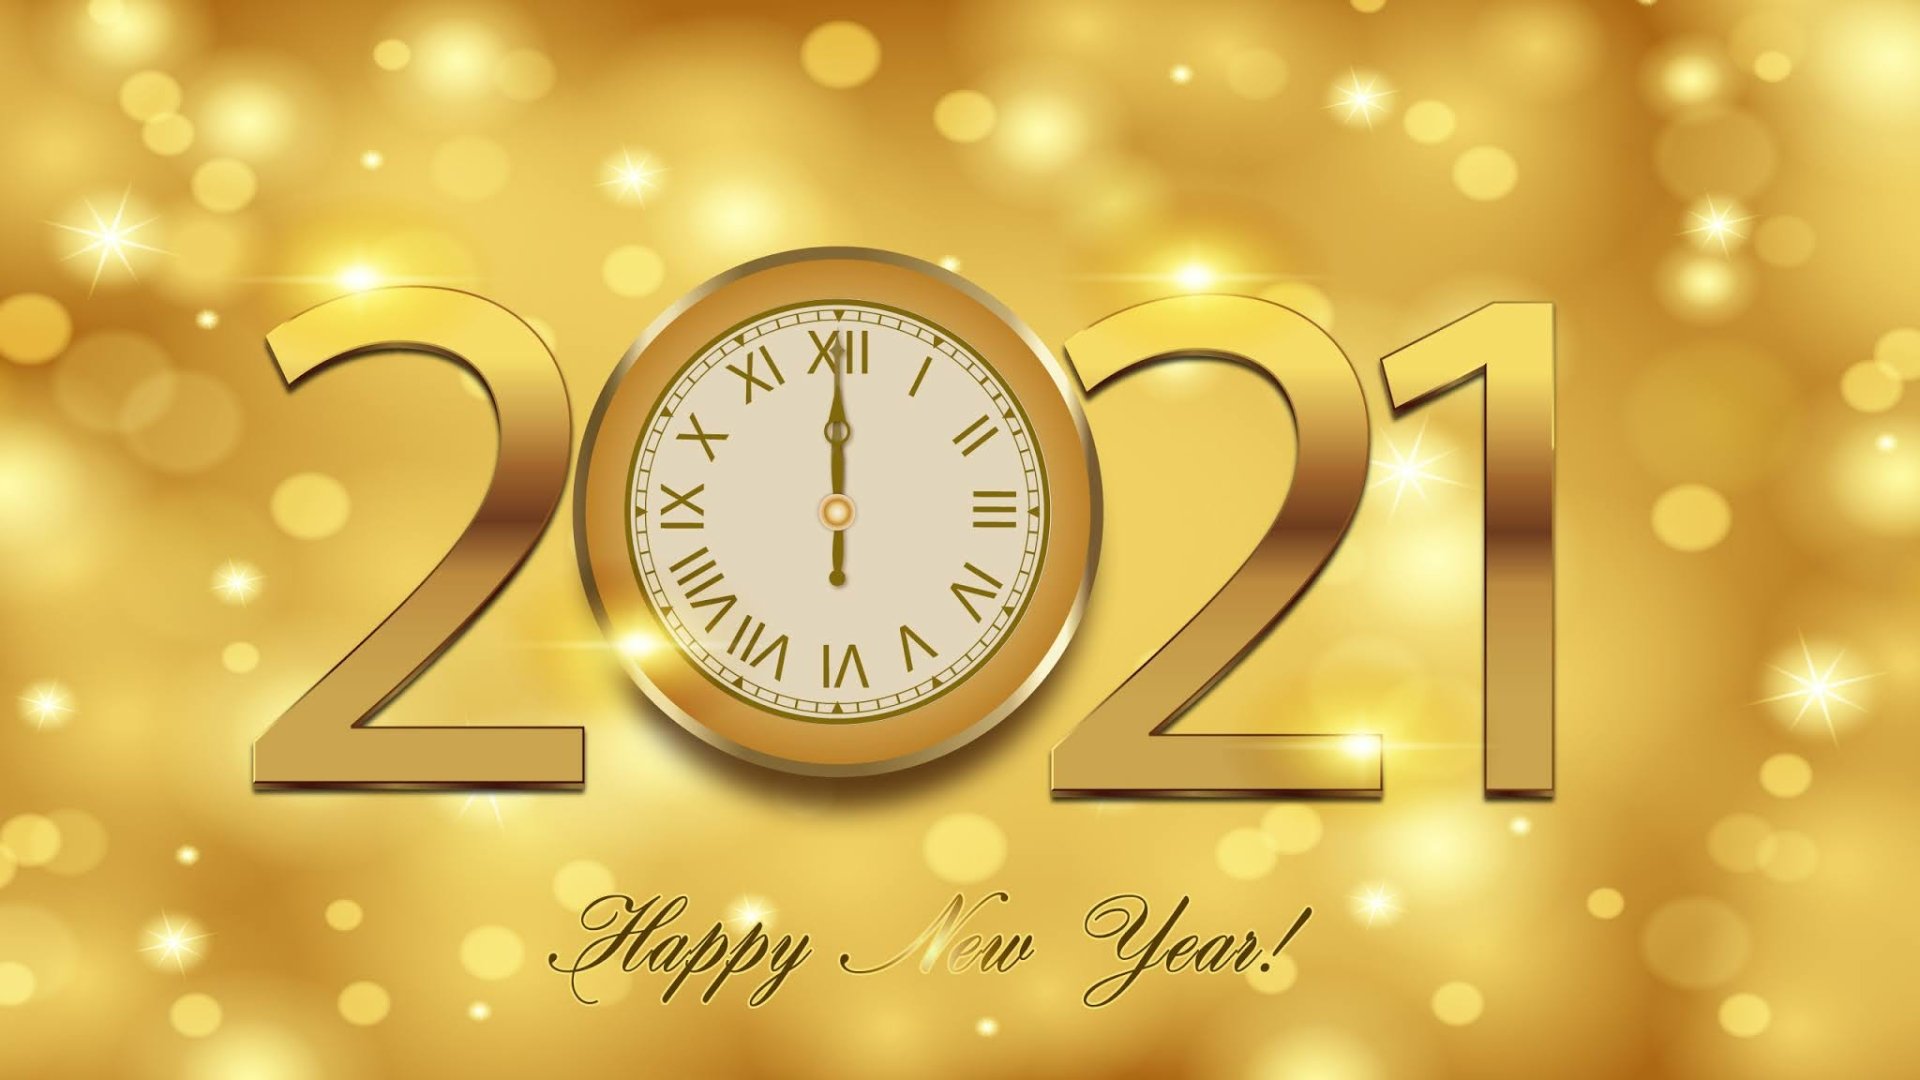 New Year 2021 Wallpaper For Desktop Image ID 1